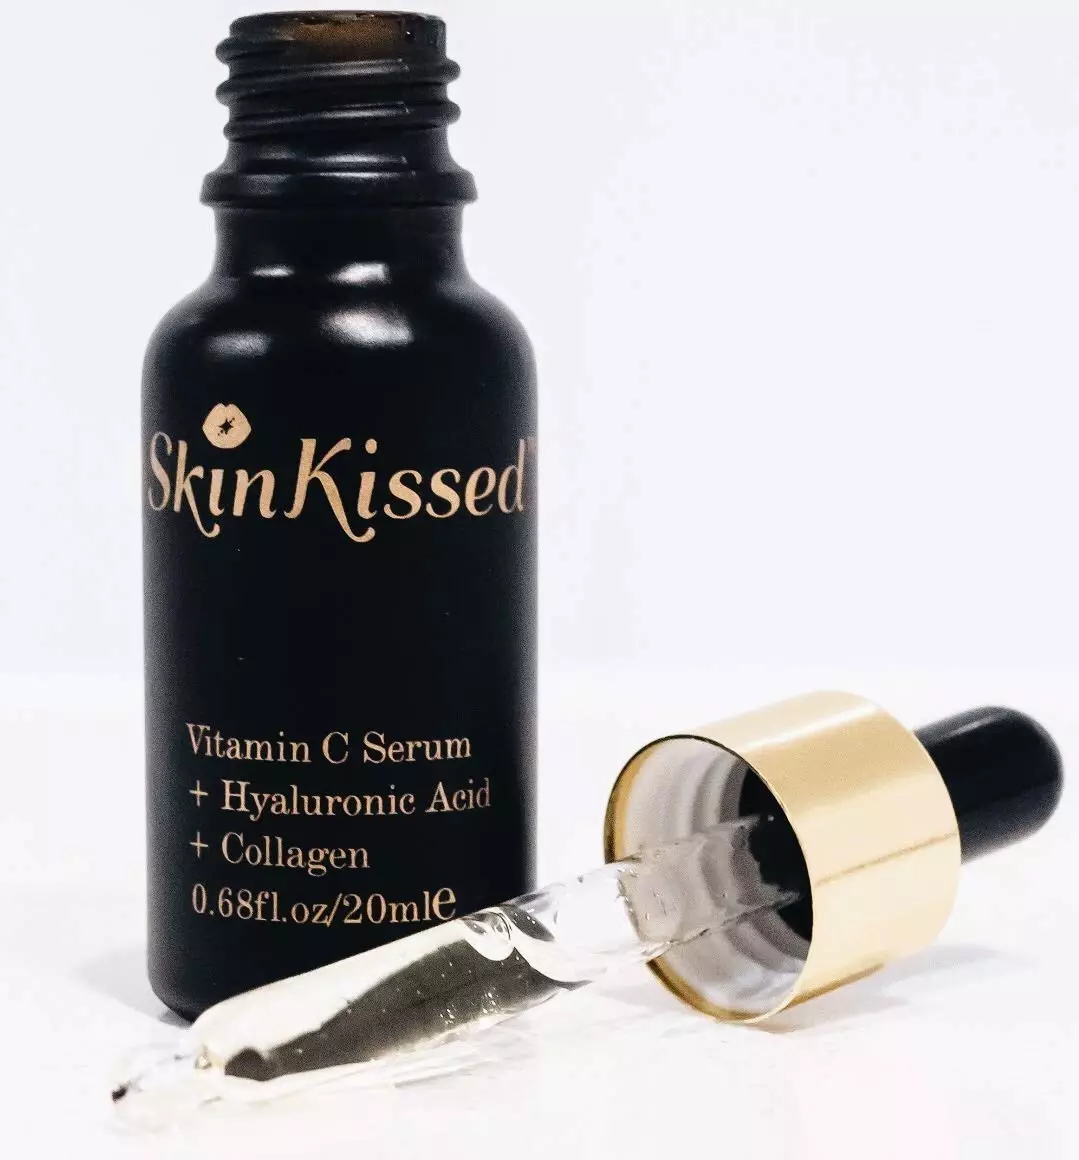 Skinkissed's face serum has been branded a 'miracle in a bottle' by beauty lovers. (